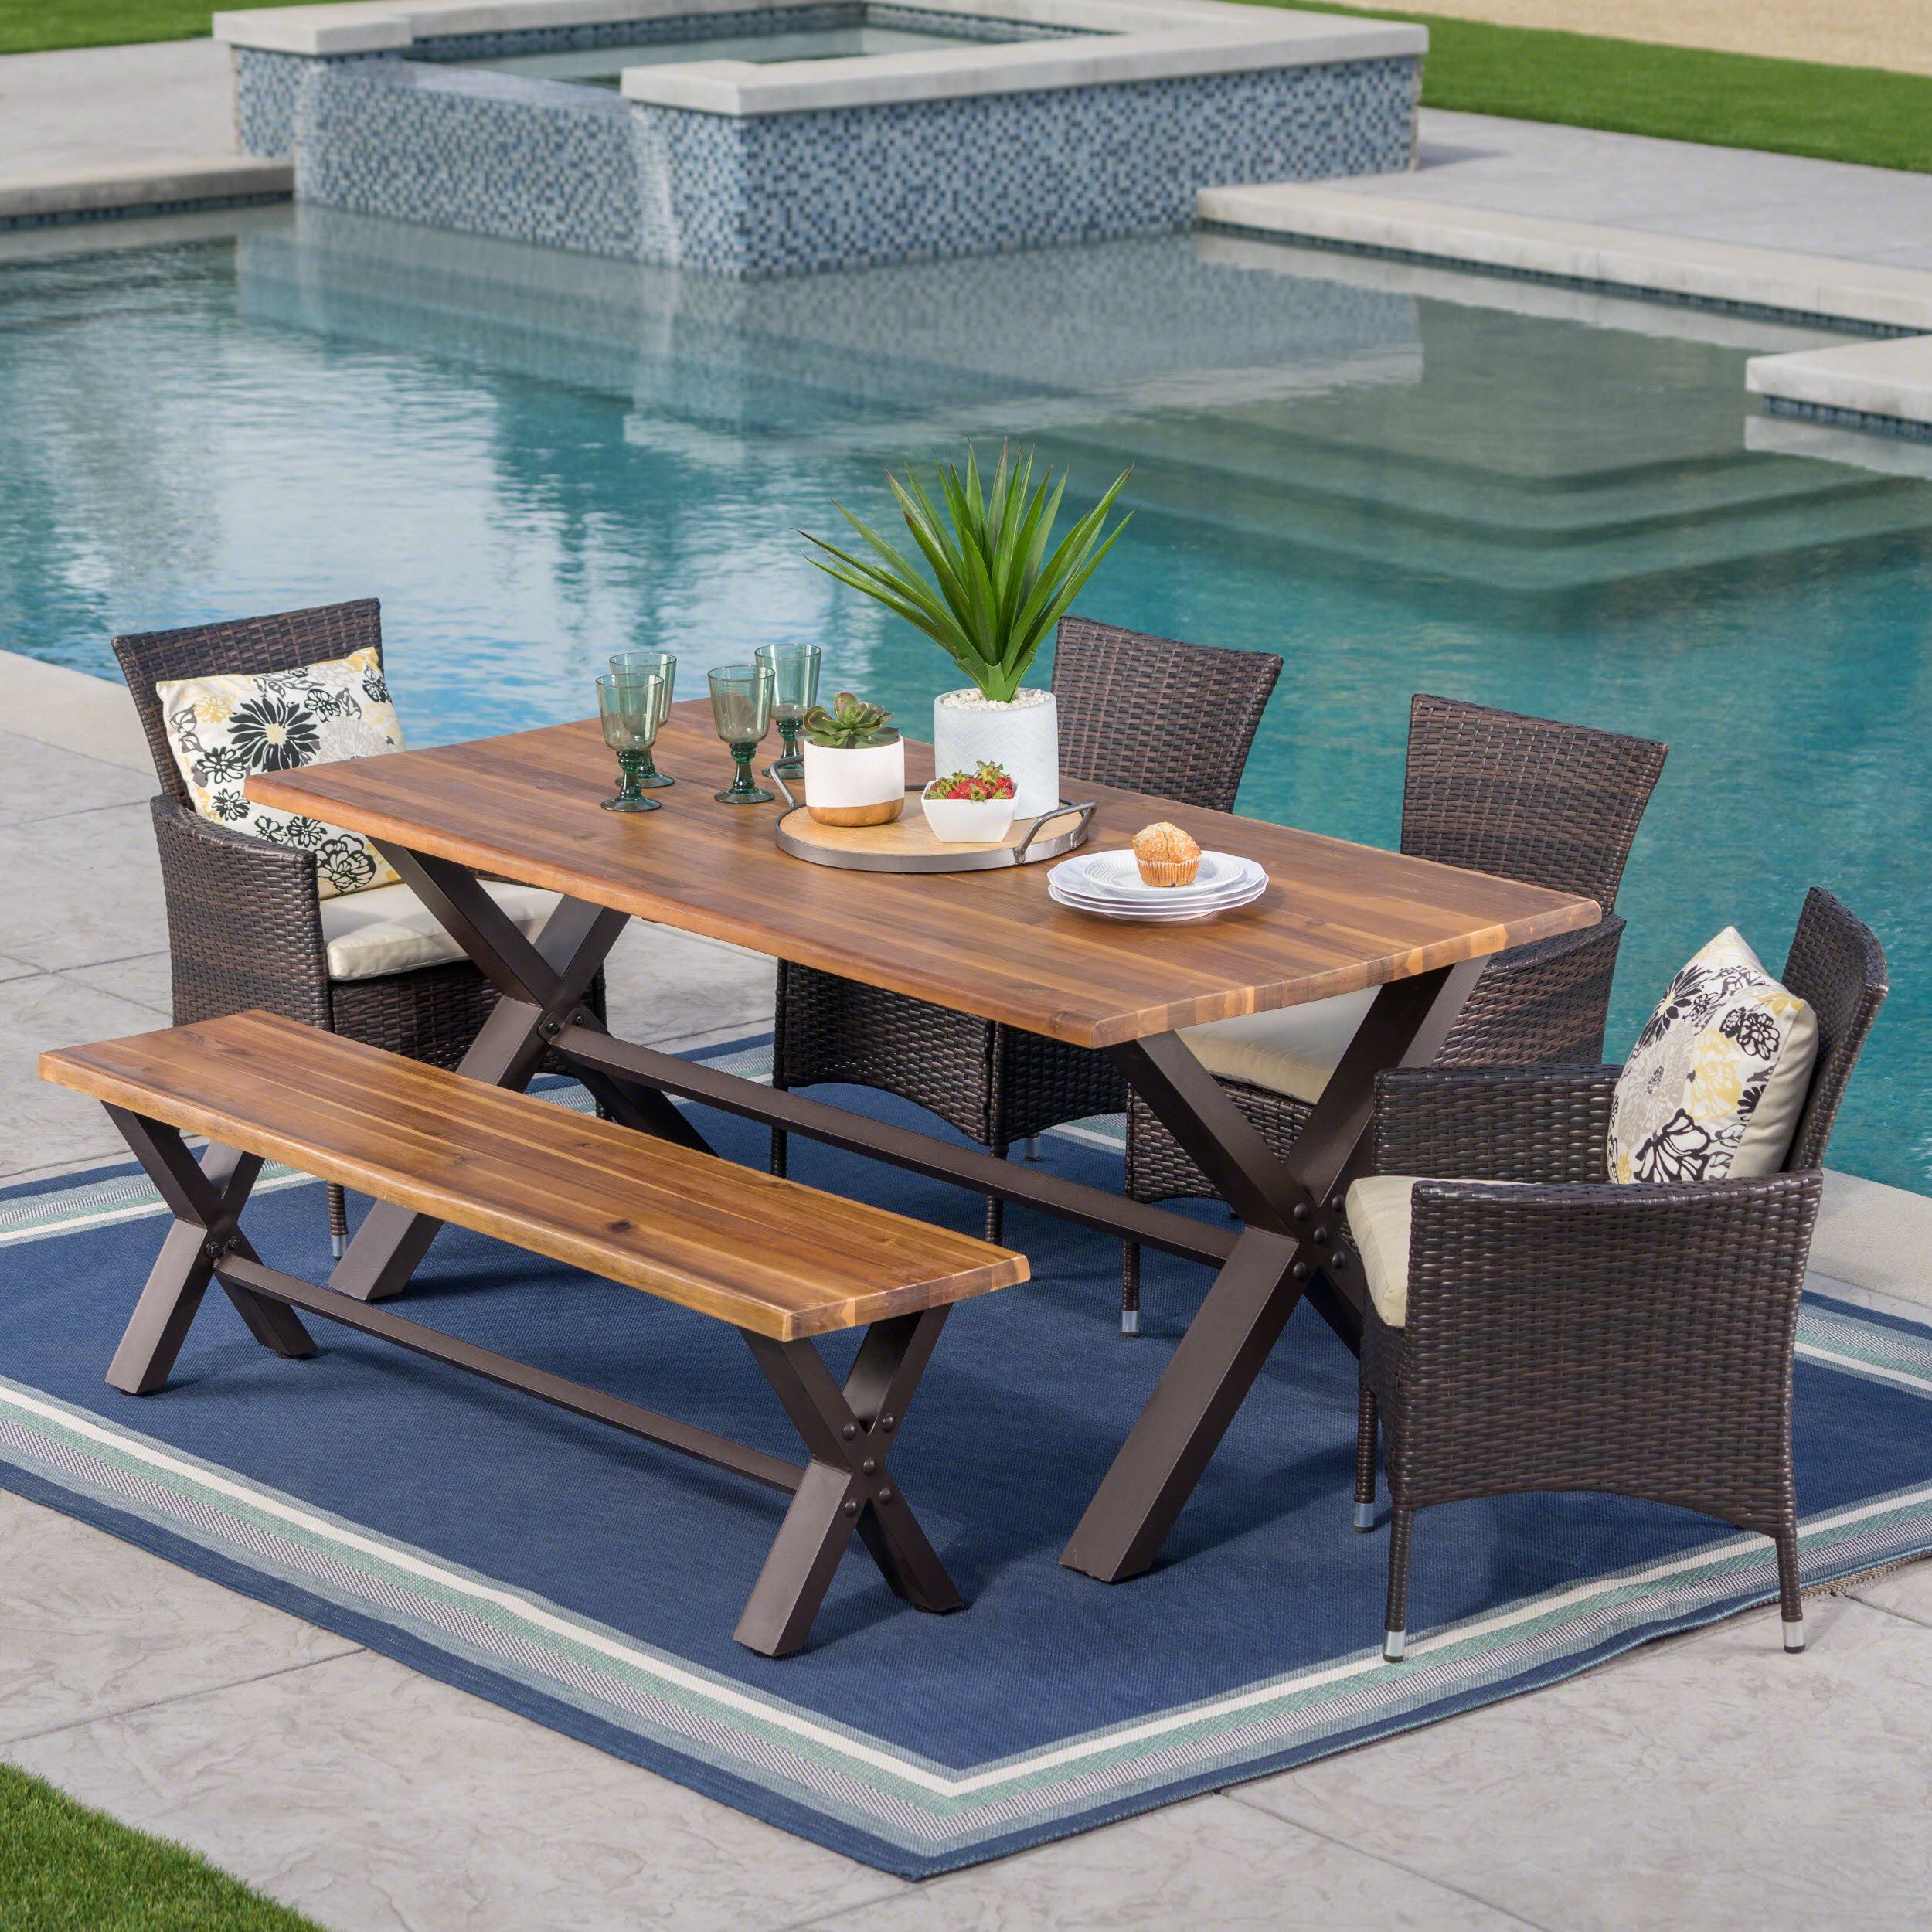 Bradley Outdoor 6 Piece Acacia Wood Dining Set With Wicker Dining In Patio Dining Sets With Cushions (View 15 of 15)